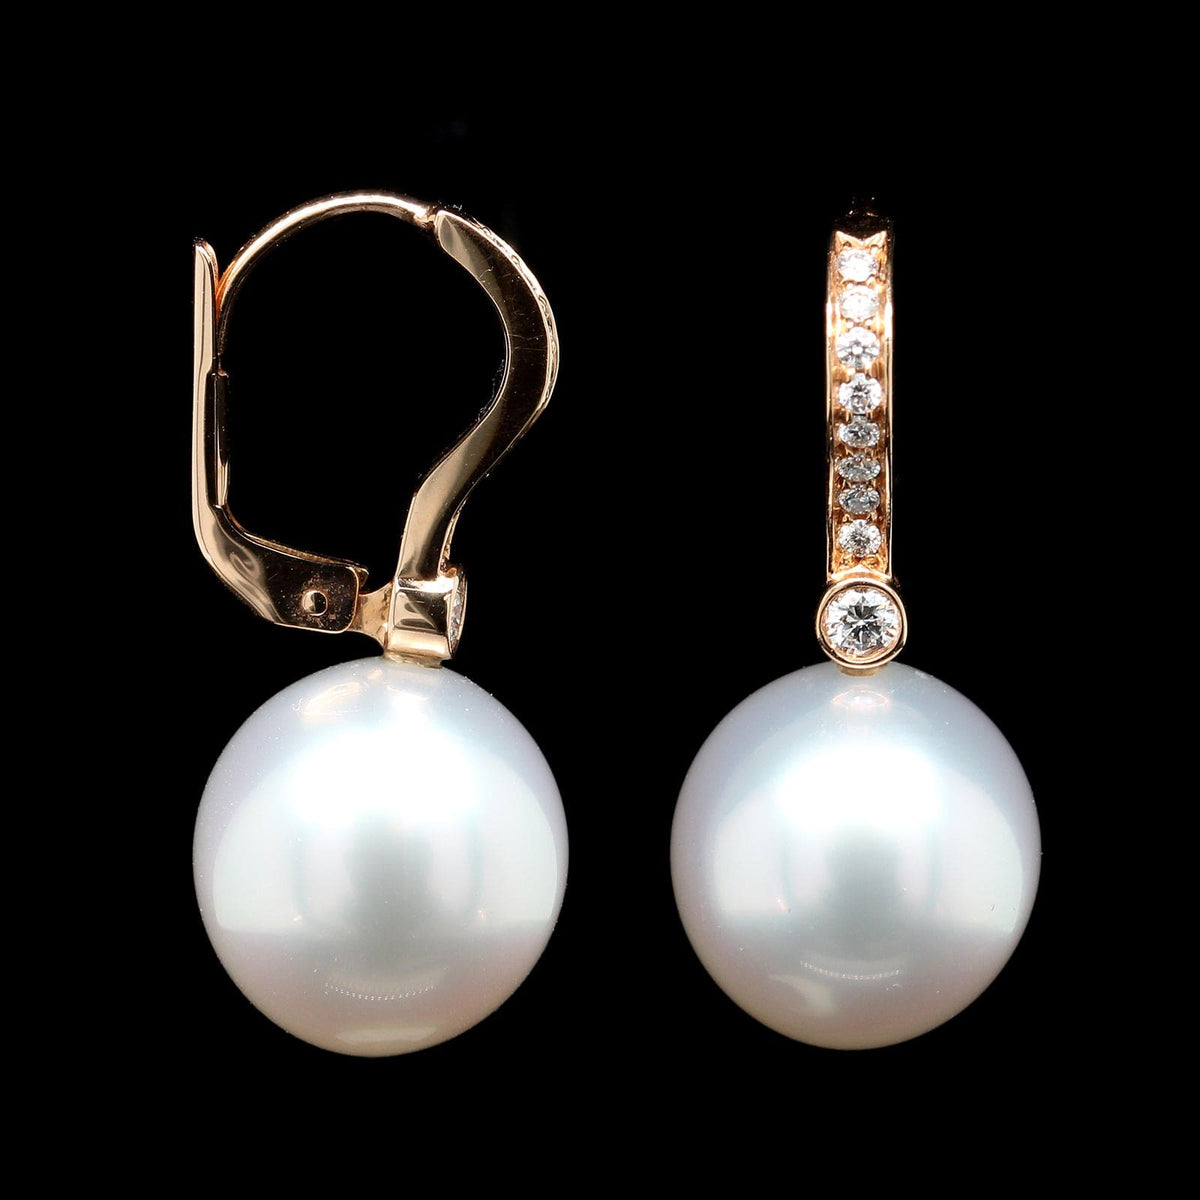 Tiffany & Co. 18K Rose Gold Estate South Sea Cultured Pearl and Diamond Earrings